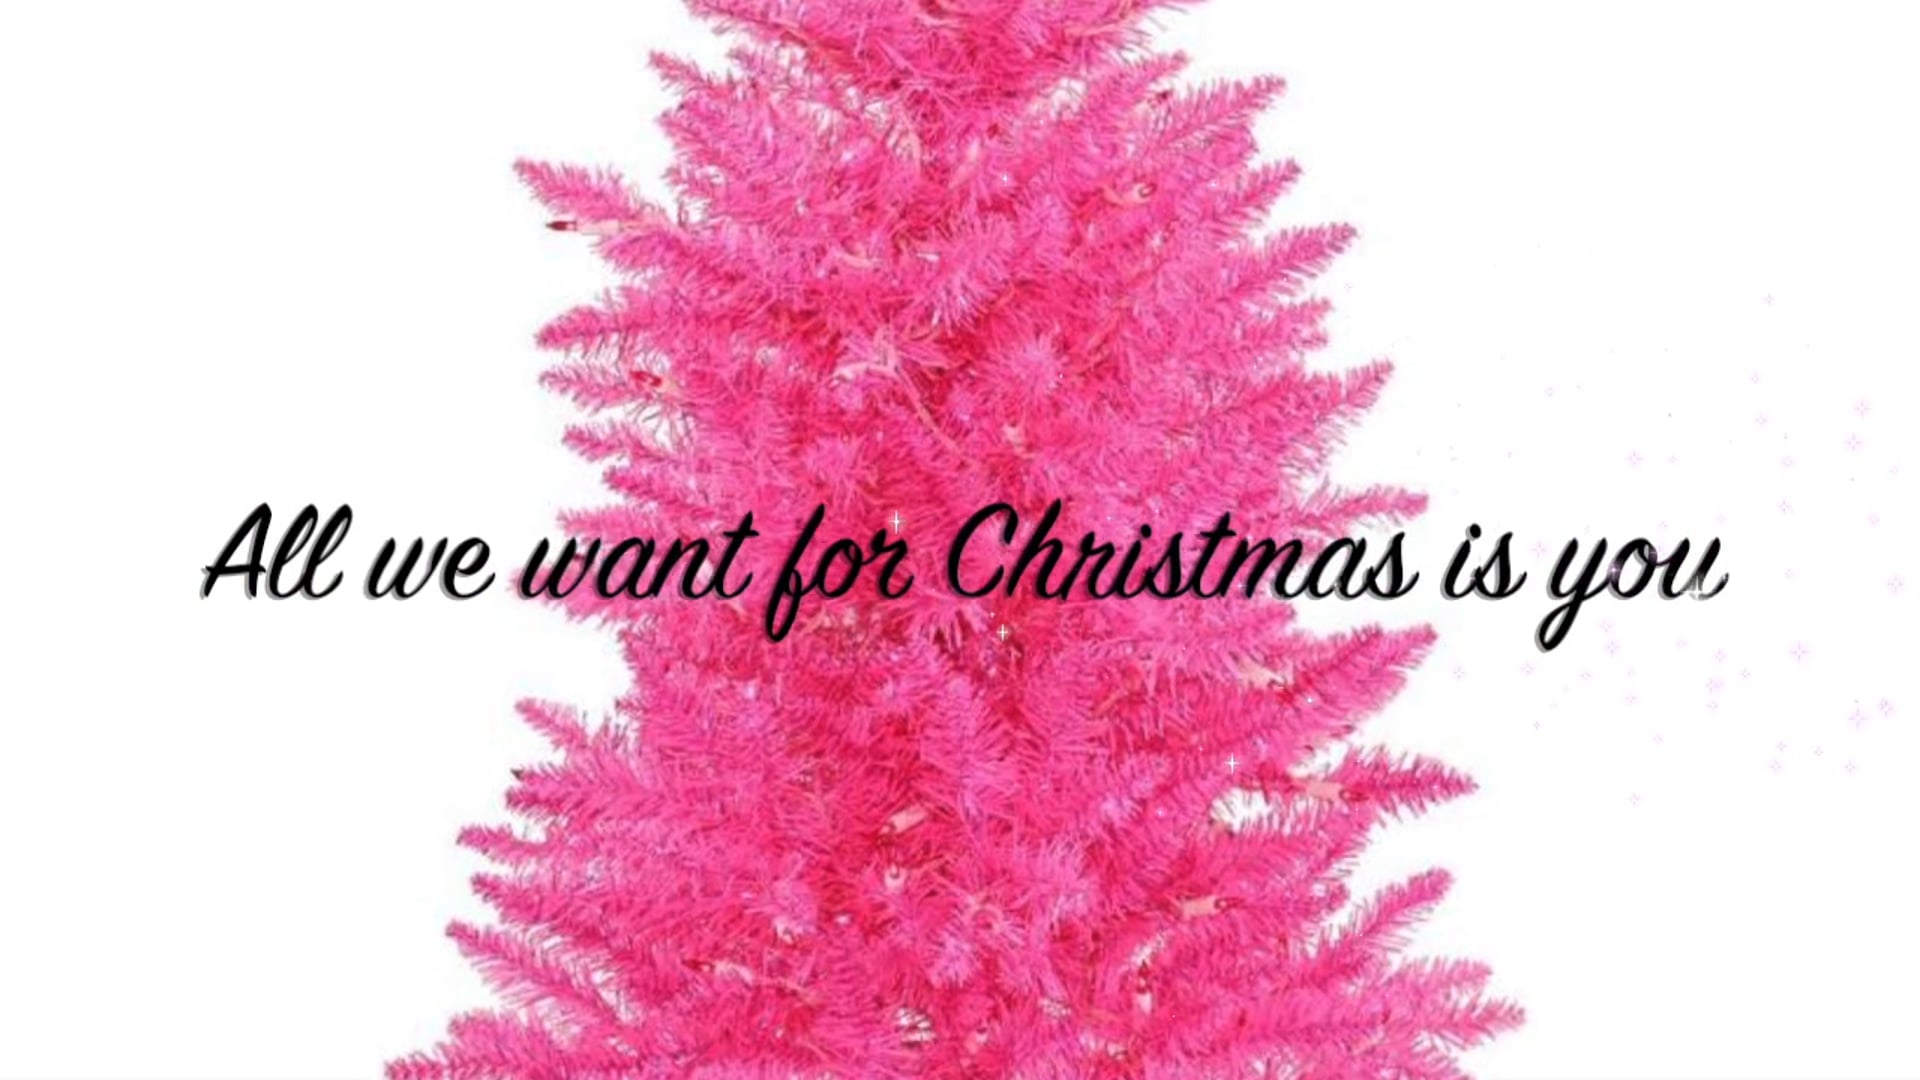 All we want for Christmas is you (2016)